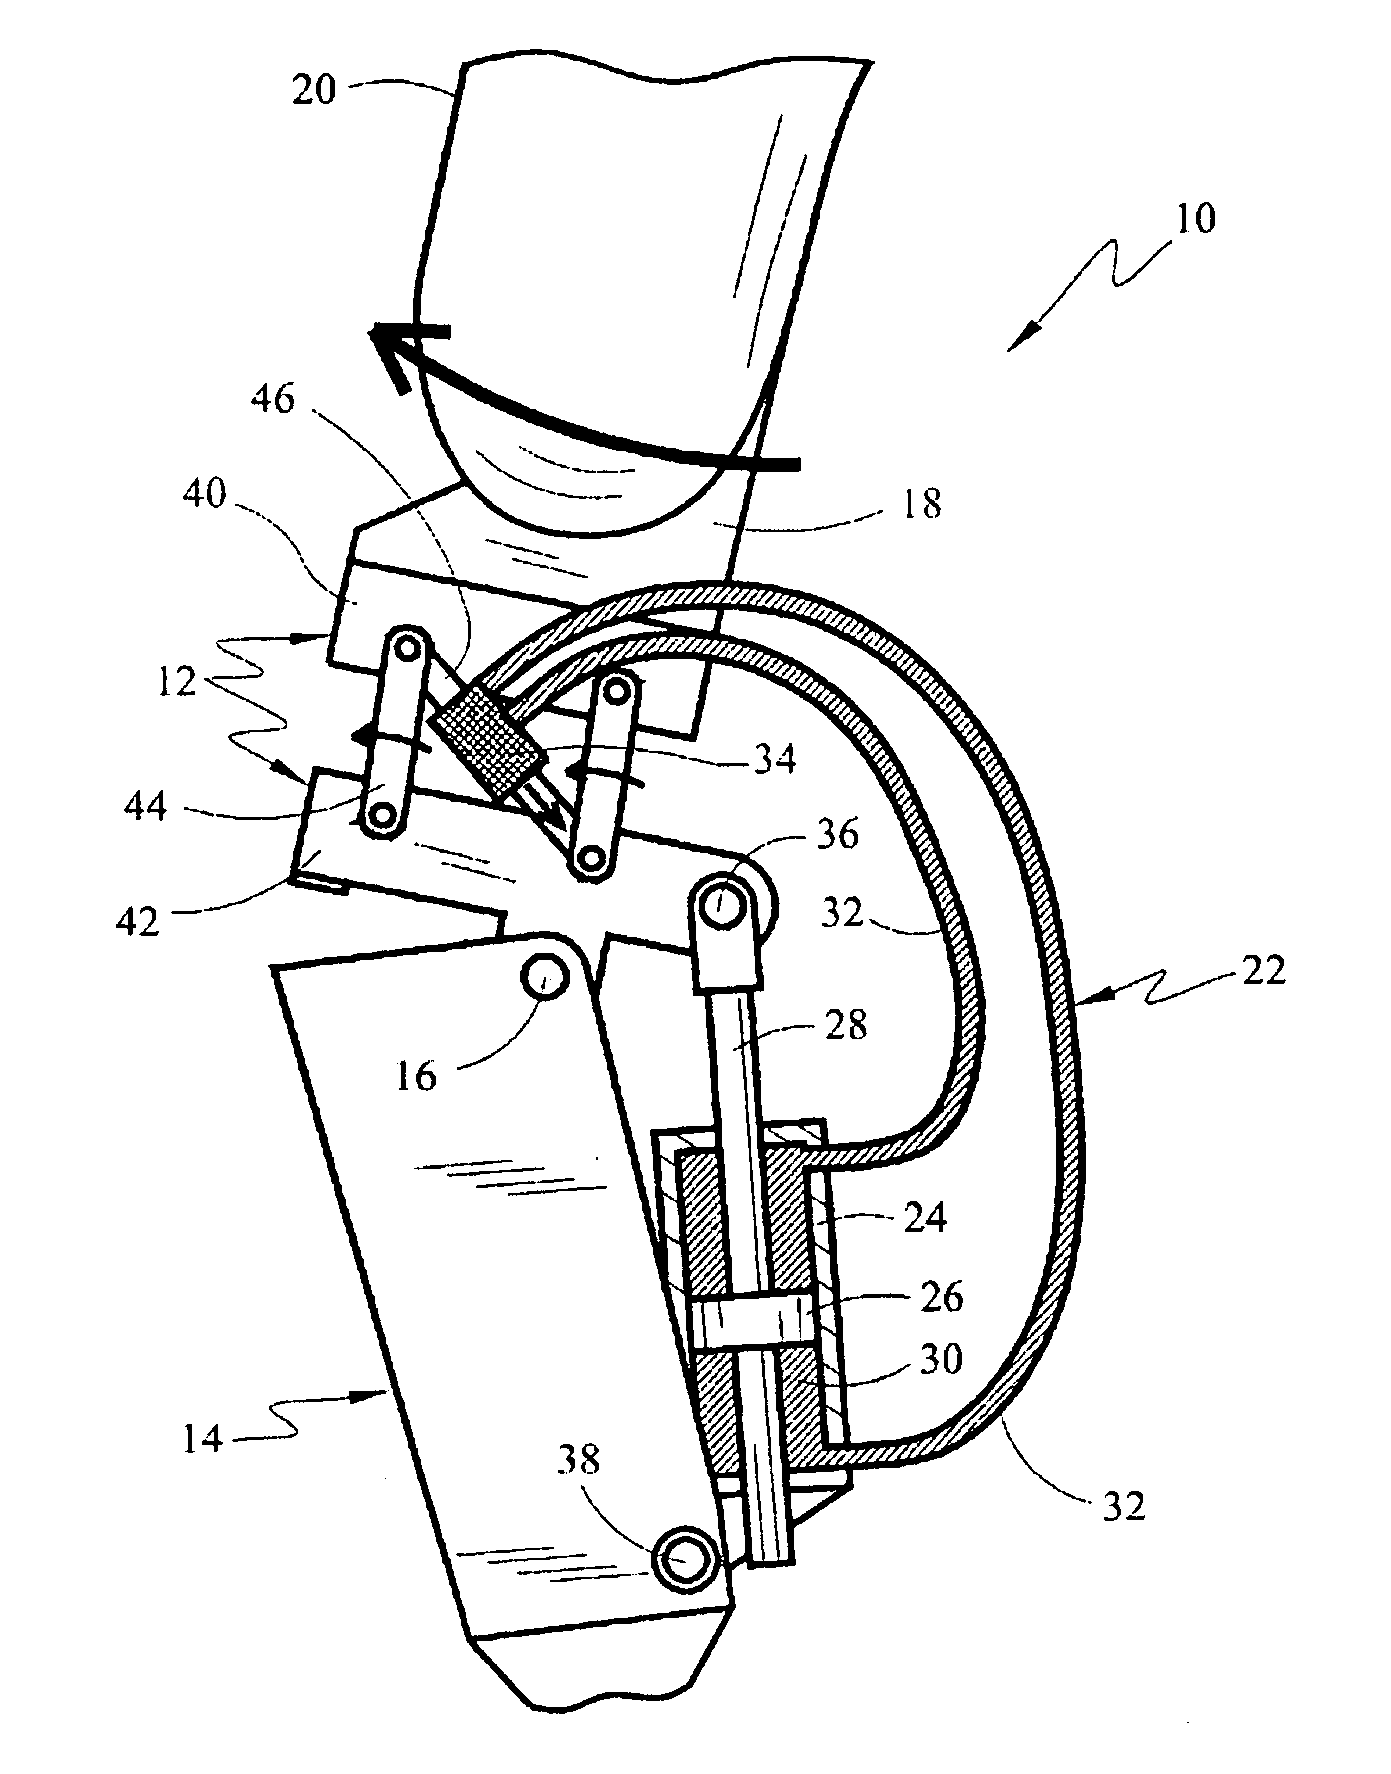 Above-knee prosthesis with variable resistance knee joint